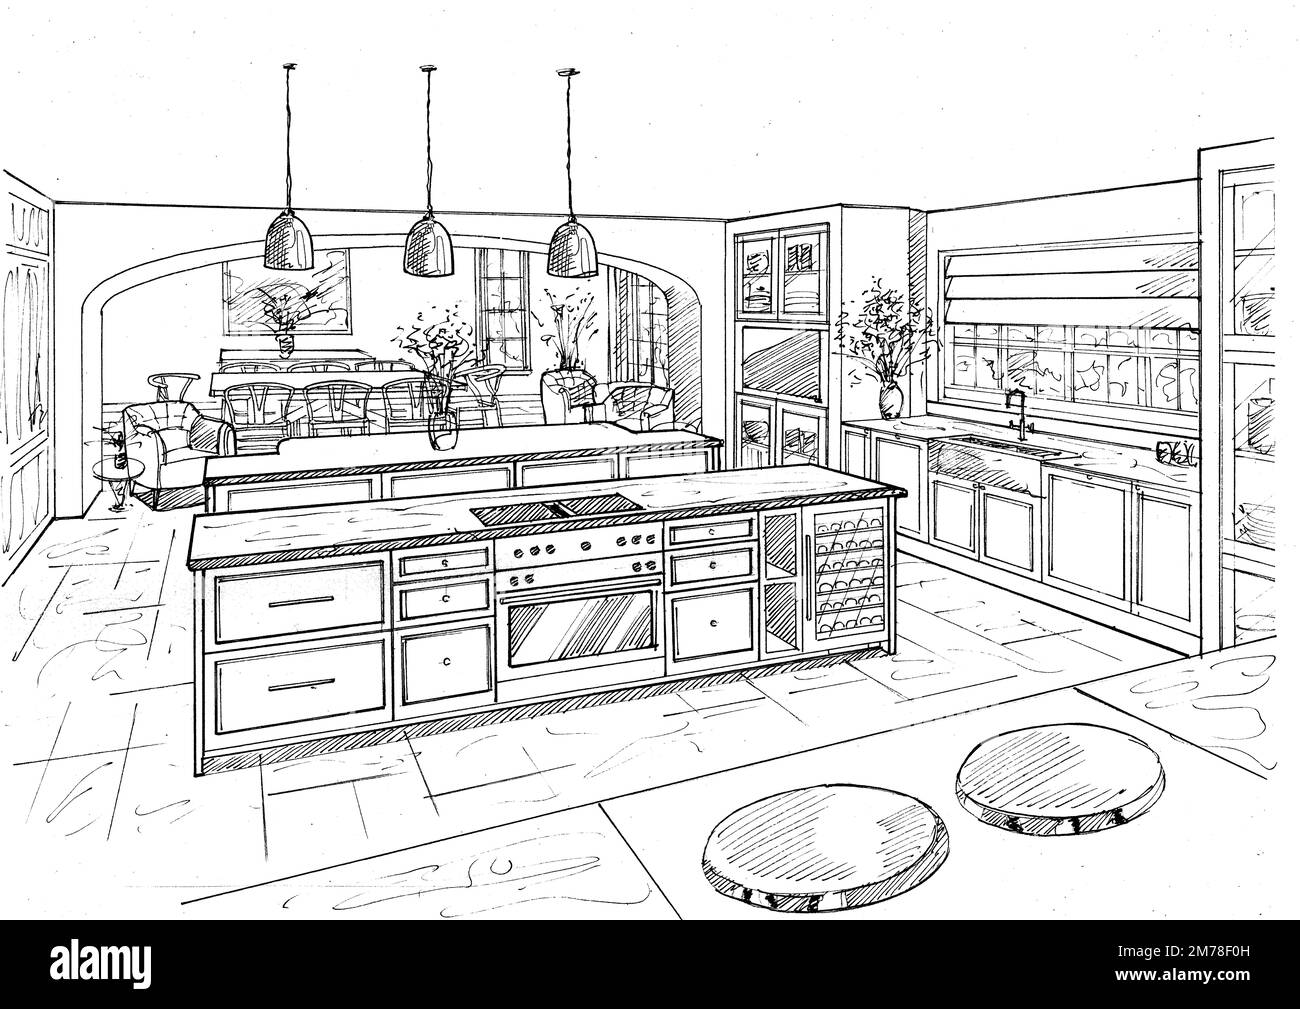 Black and white sketch of a country kitchen interior on a white background. Stock Photo